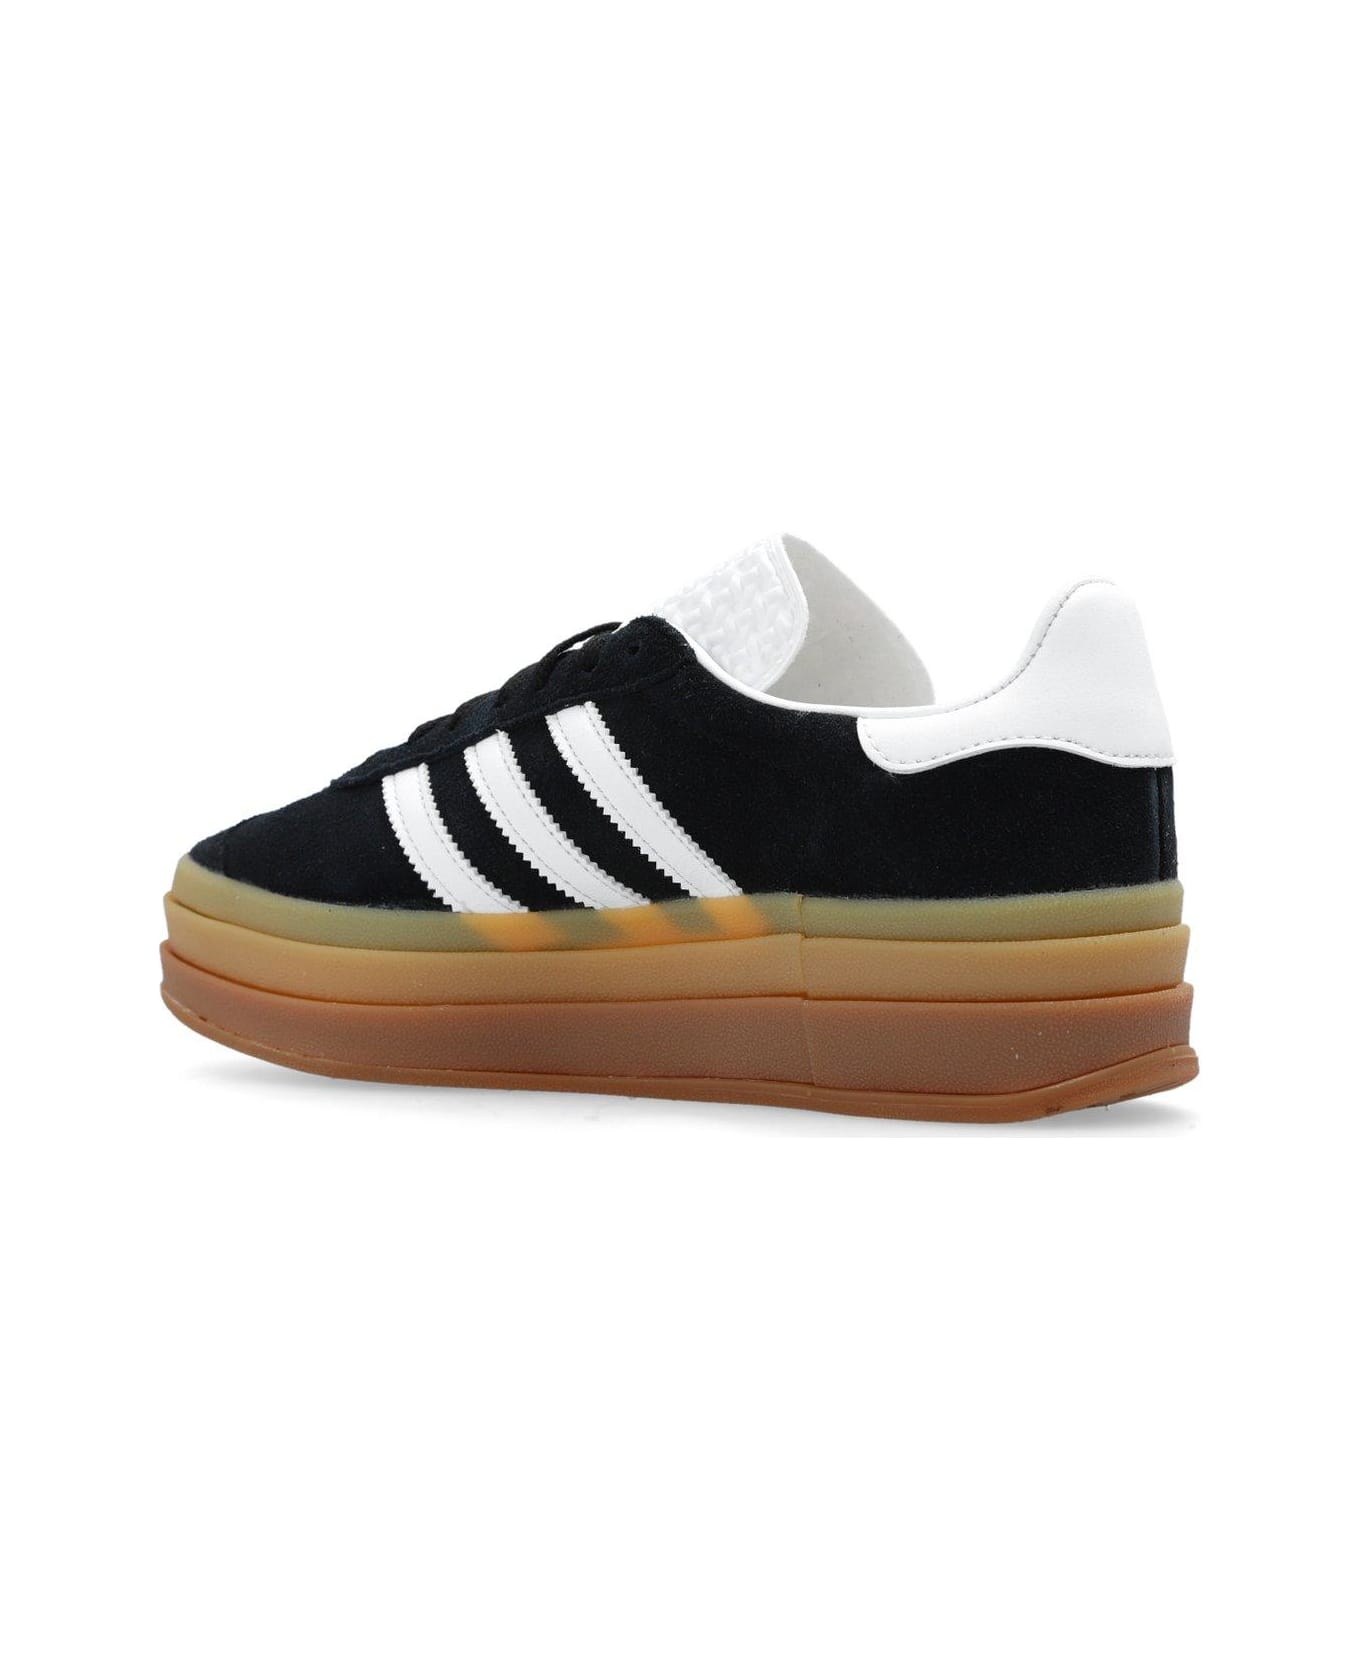 Adidas Gazelle Bold Lace-up Sneakers - BLACK